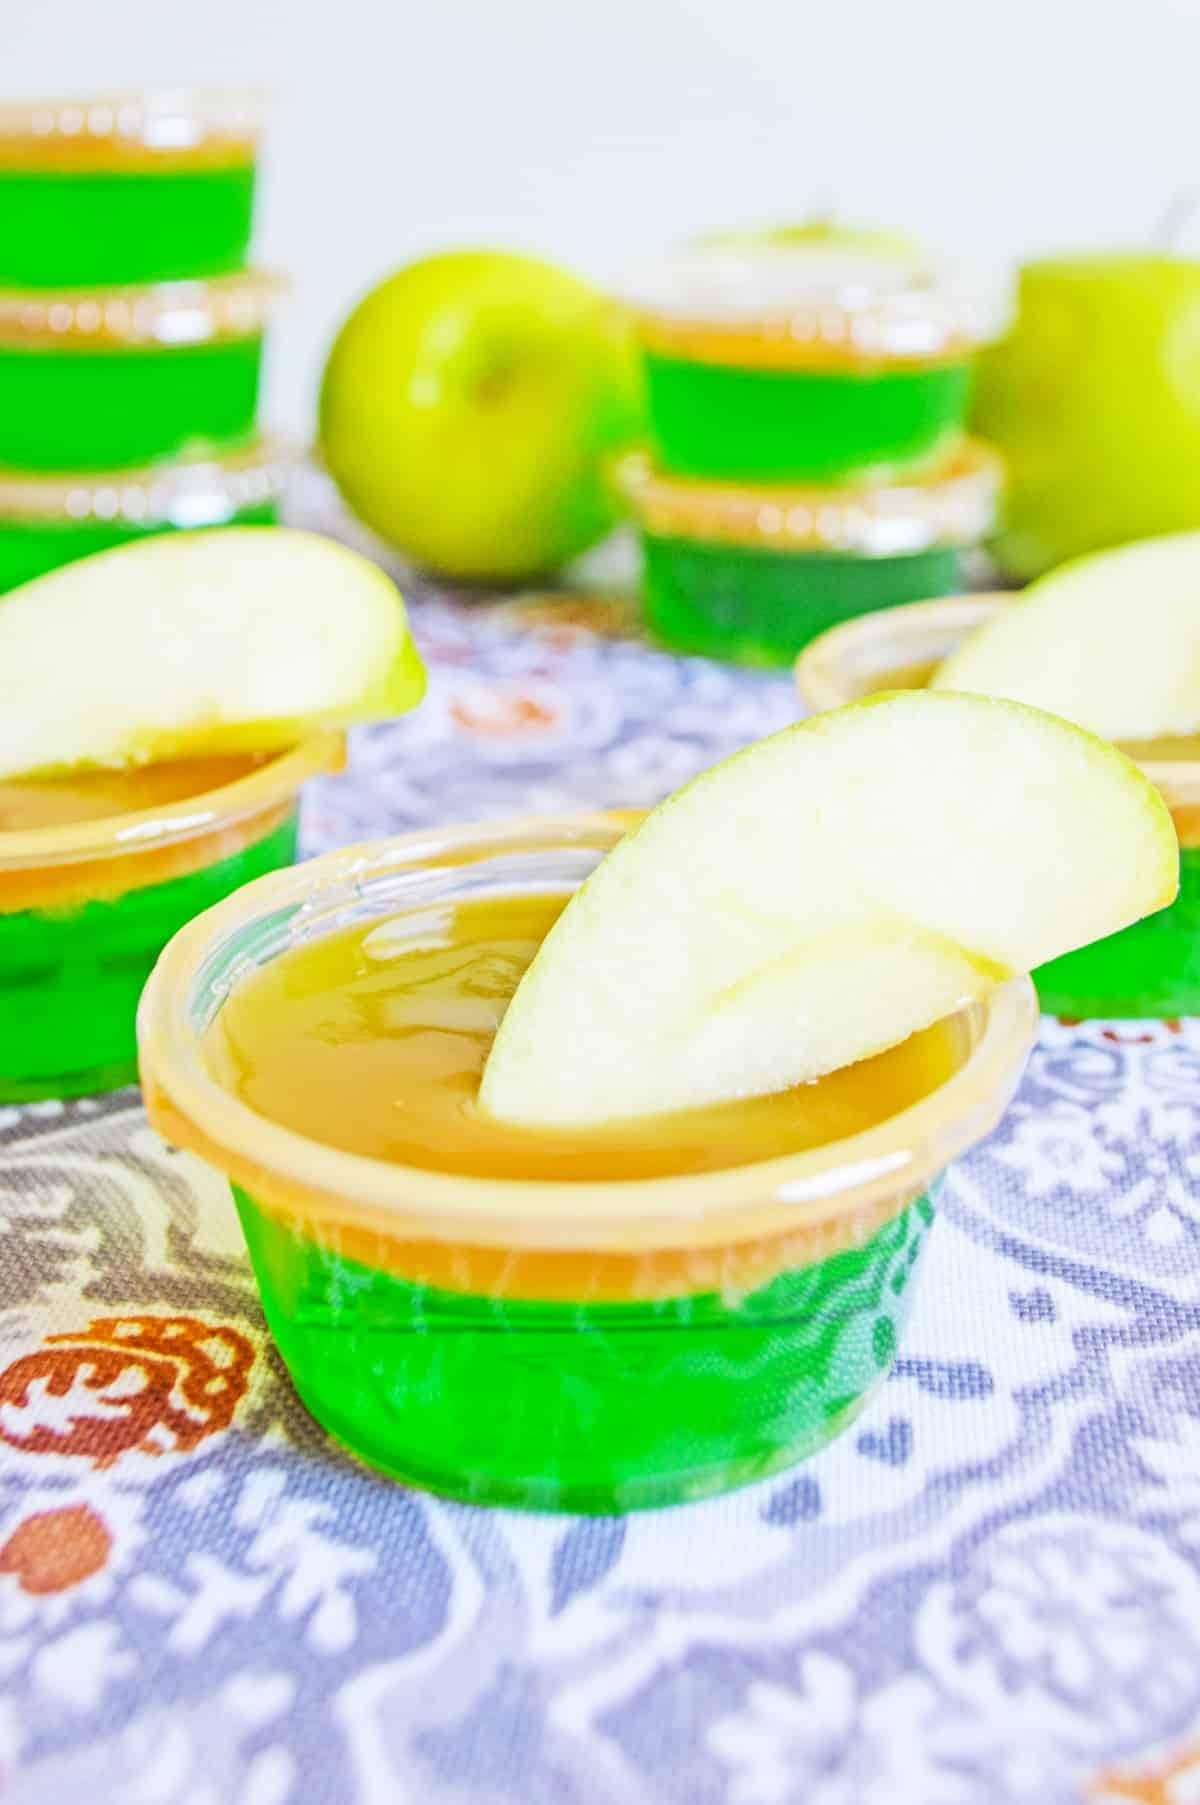 Apple Jello shots on plastic cups topped with caramel syrup and apple slice garnish.